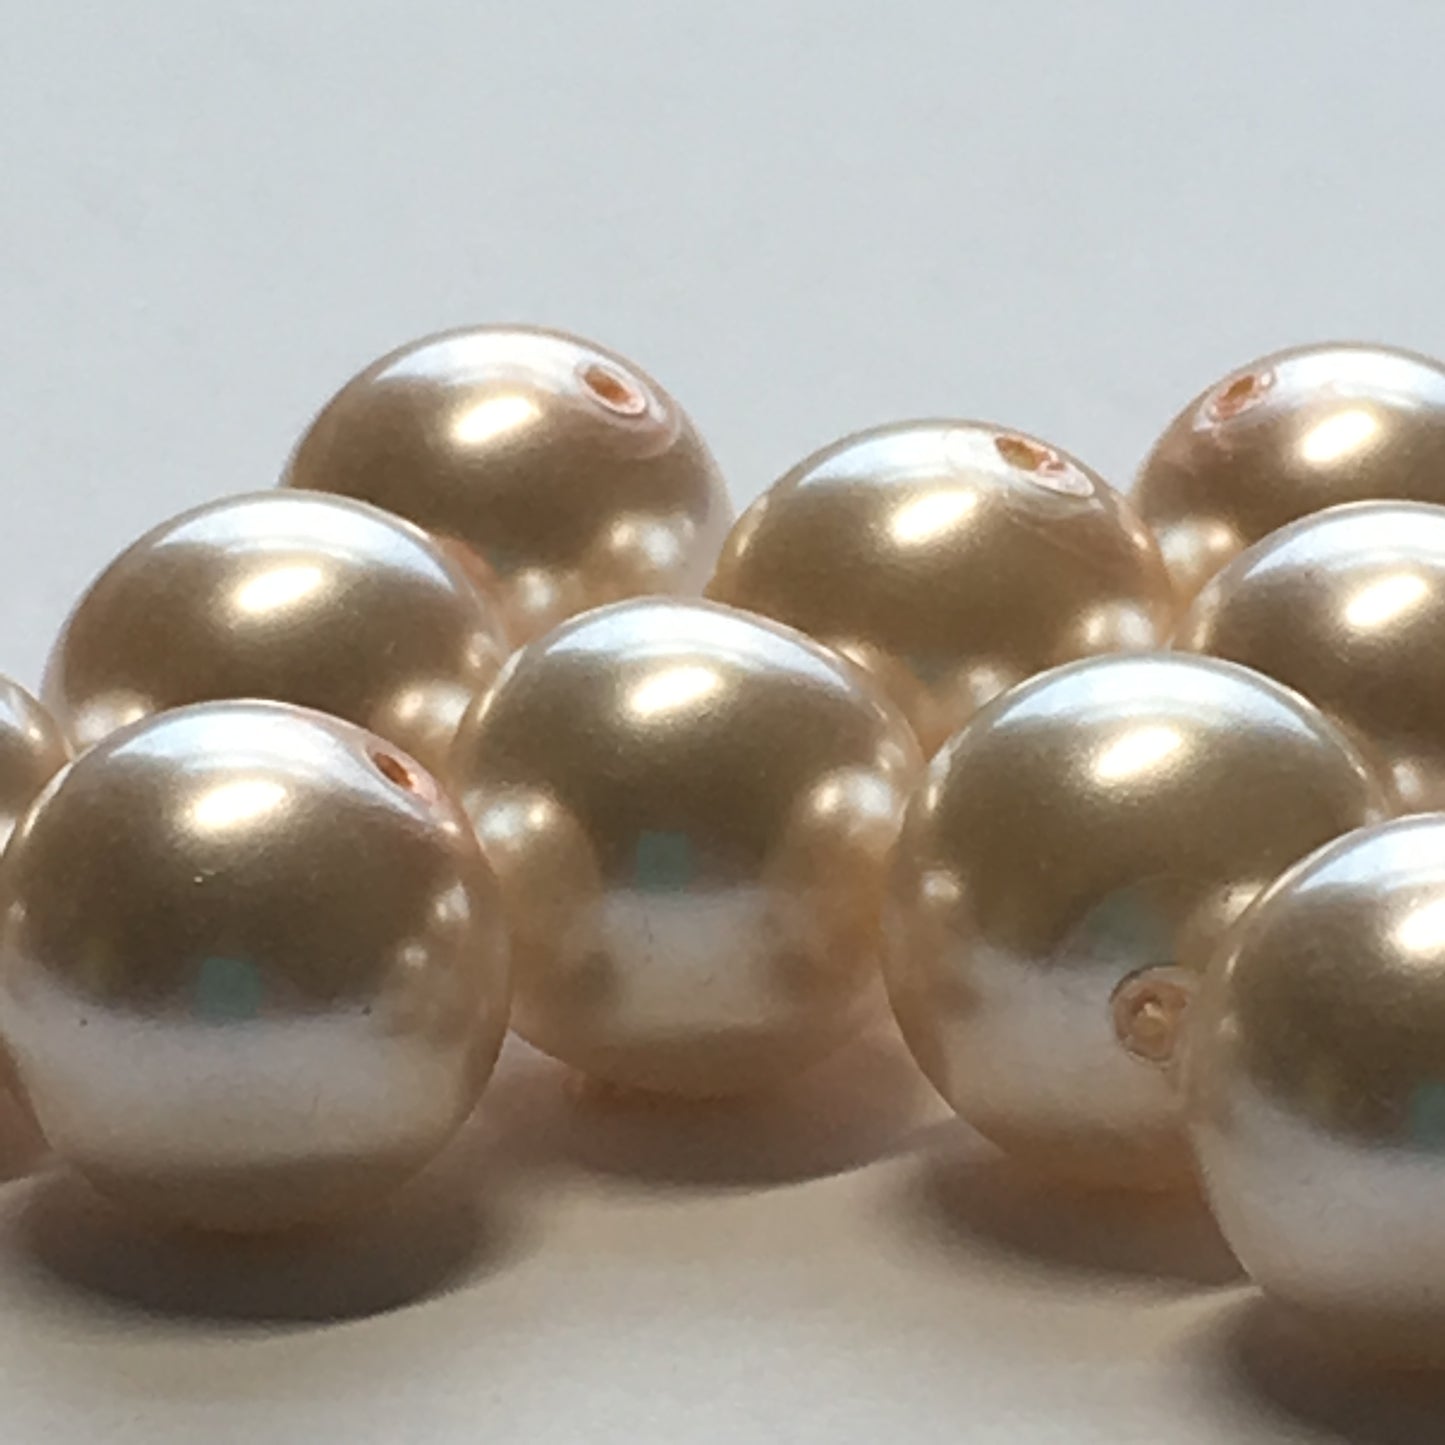 Light Pink Pearl Round Glass Beads, 10 mm, 16 Beads